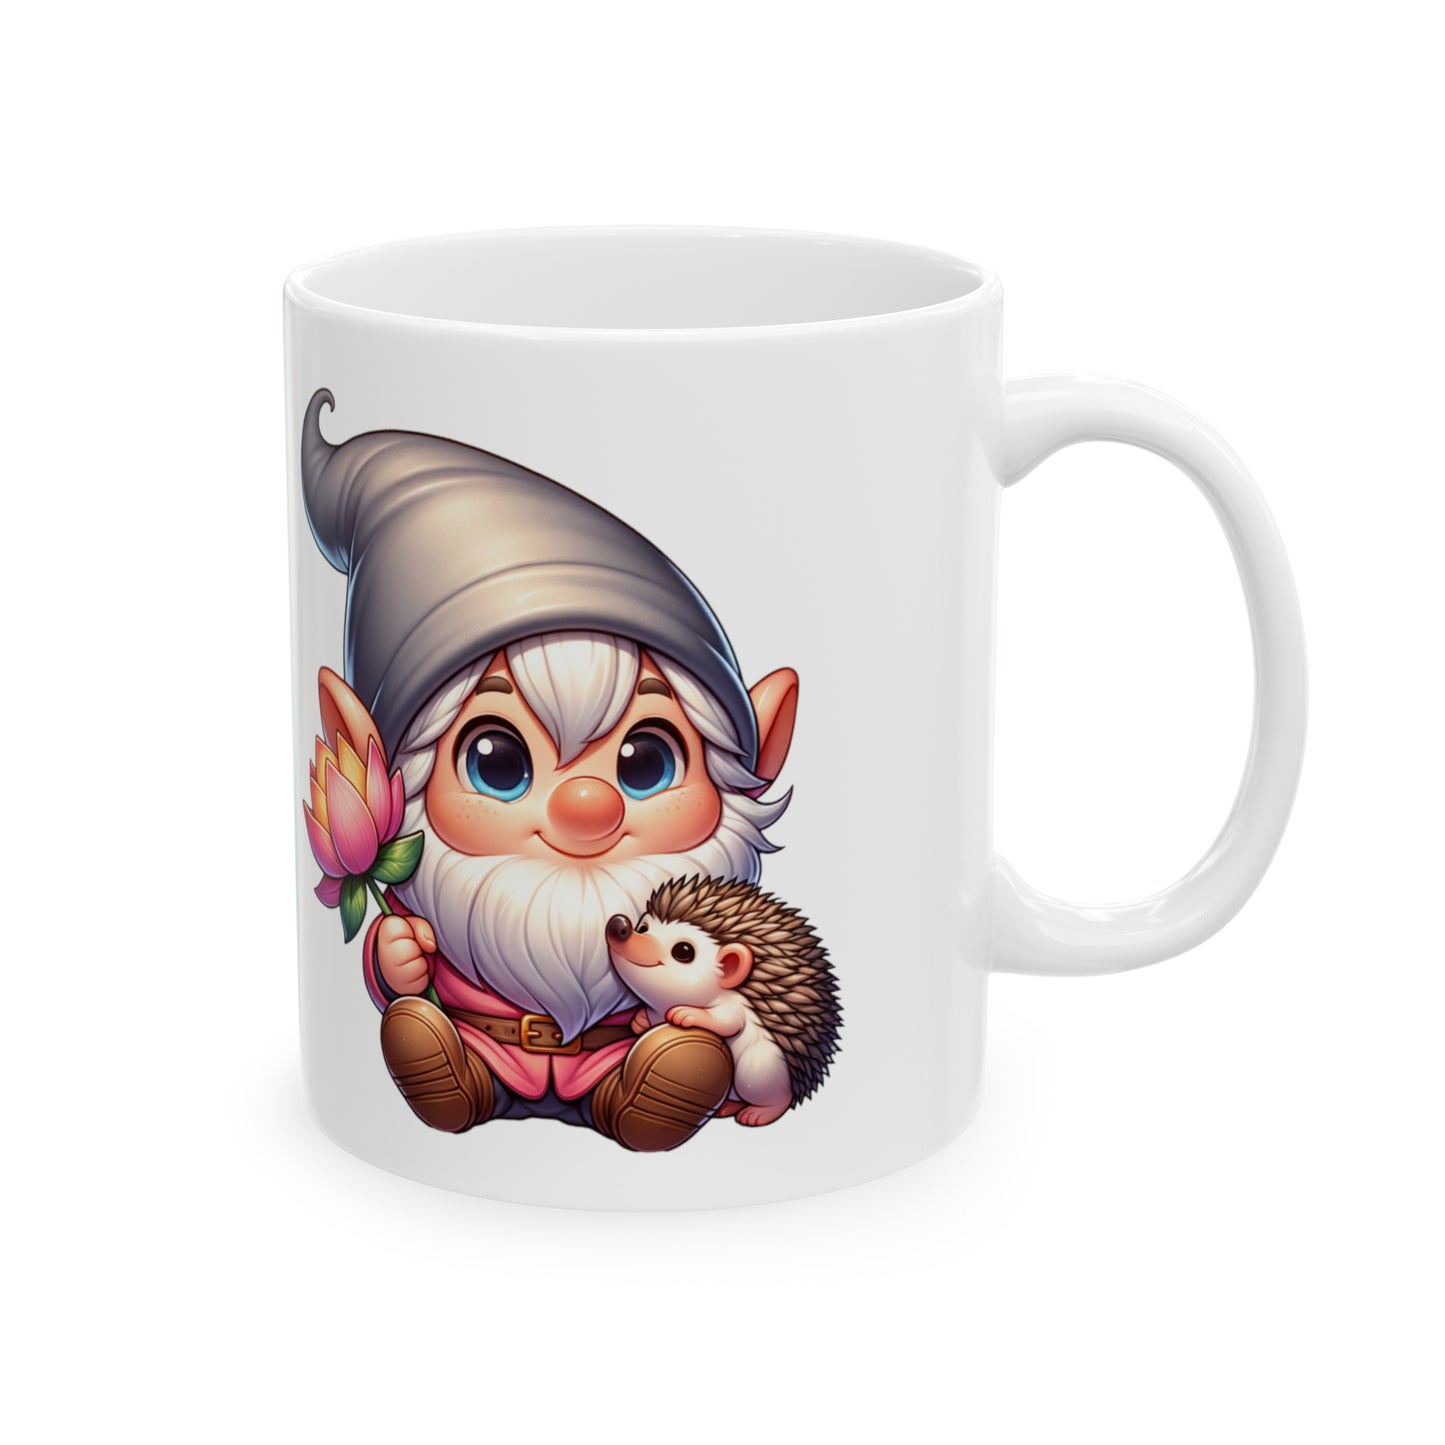 Gnome Hedgehog Lotus Mug Father's Day Gift, Birthday Coffee Cup for Best Gnomie Dad Peaceful Companion for Dad's Moments, Ceramic Mug, 11oz